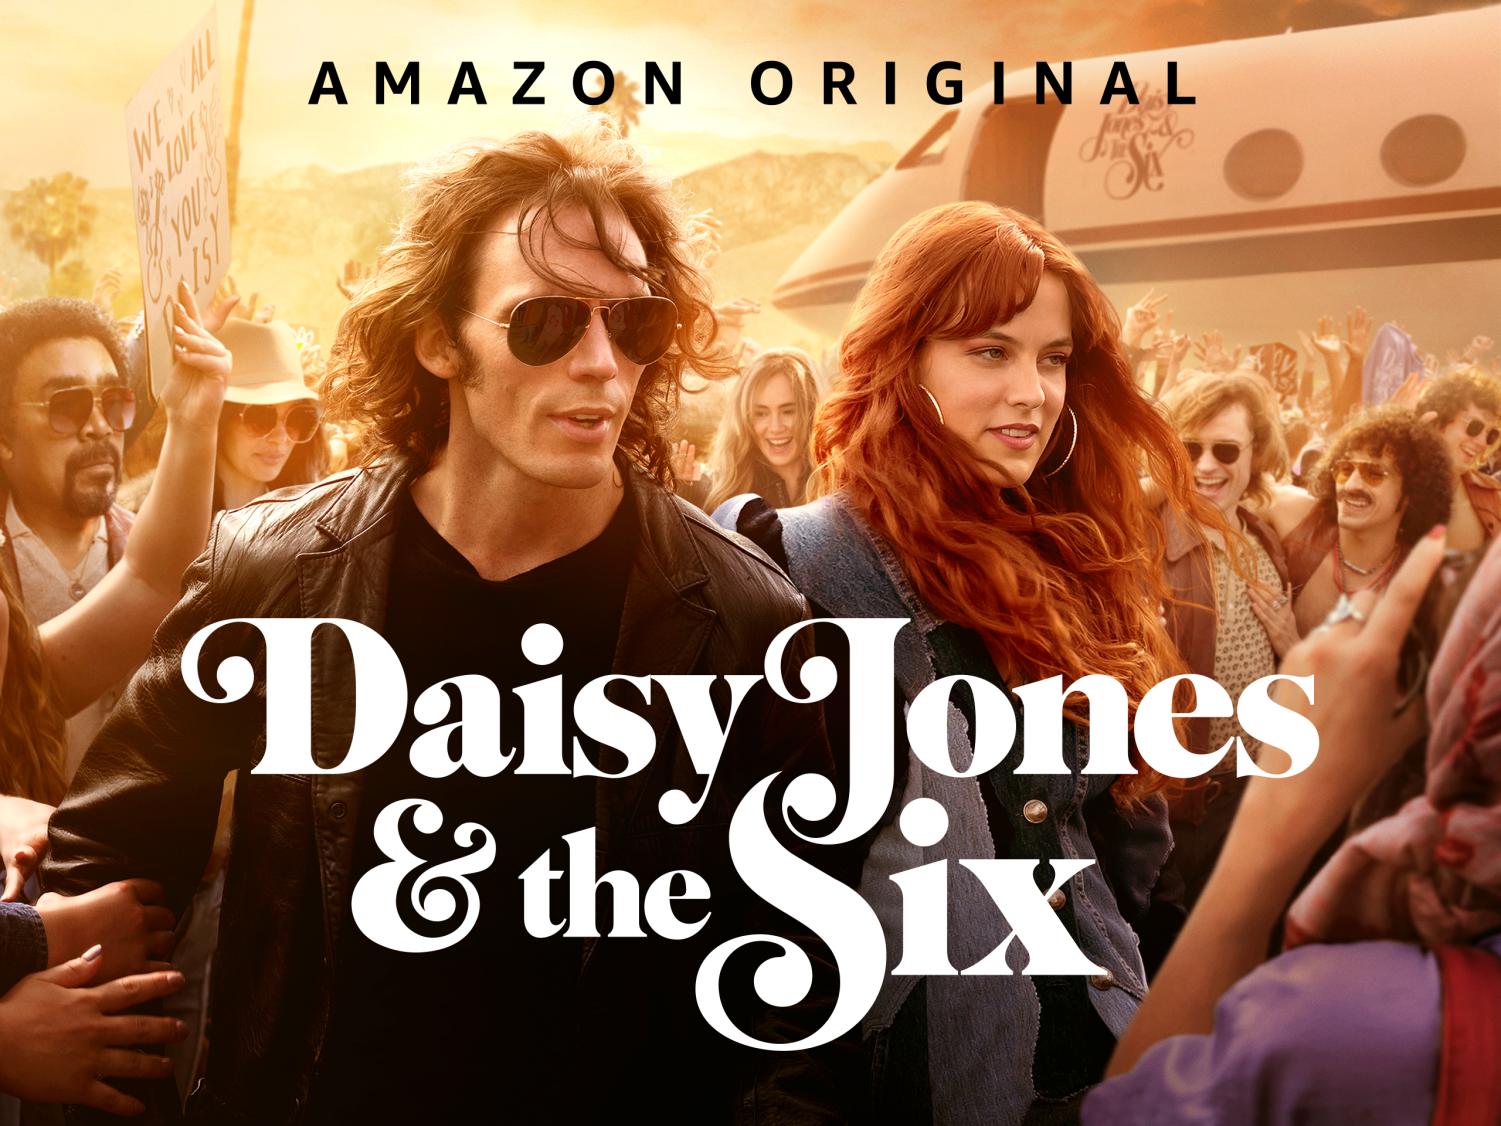 Daisy Jones & the Six': The Largest Fictional Band of the '70s